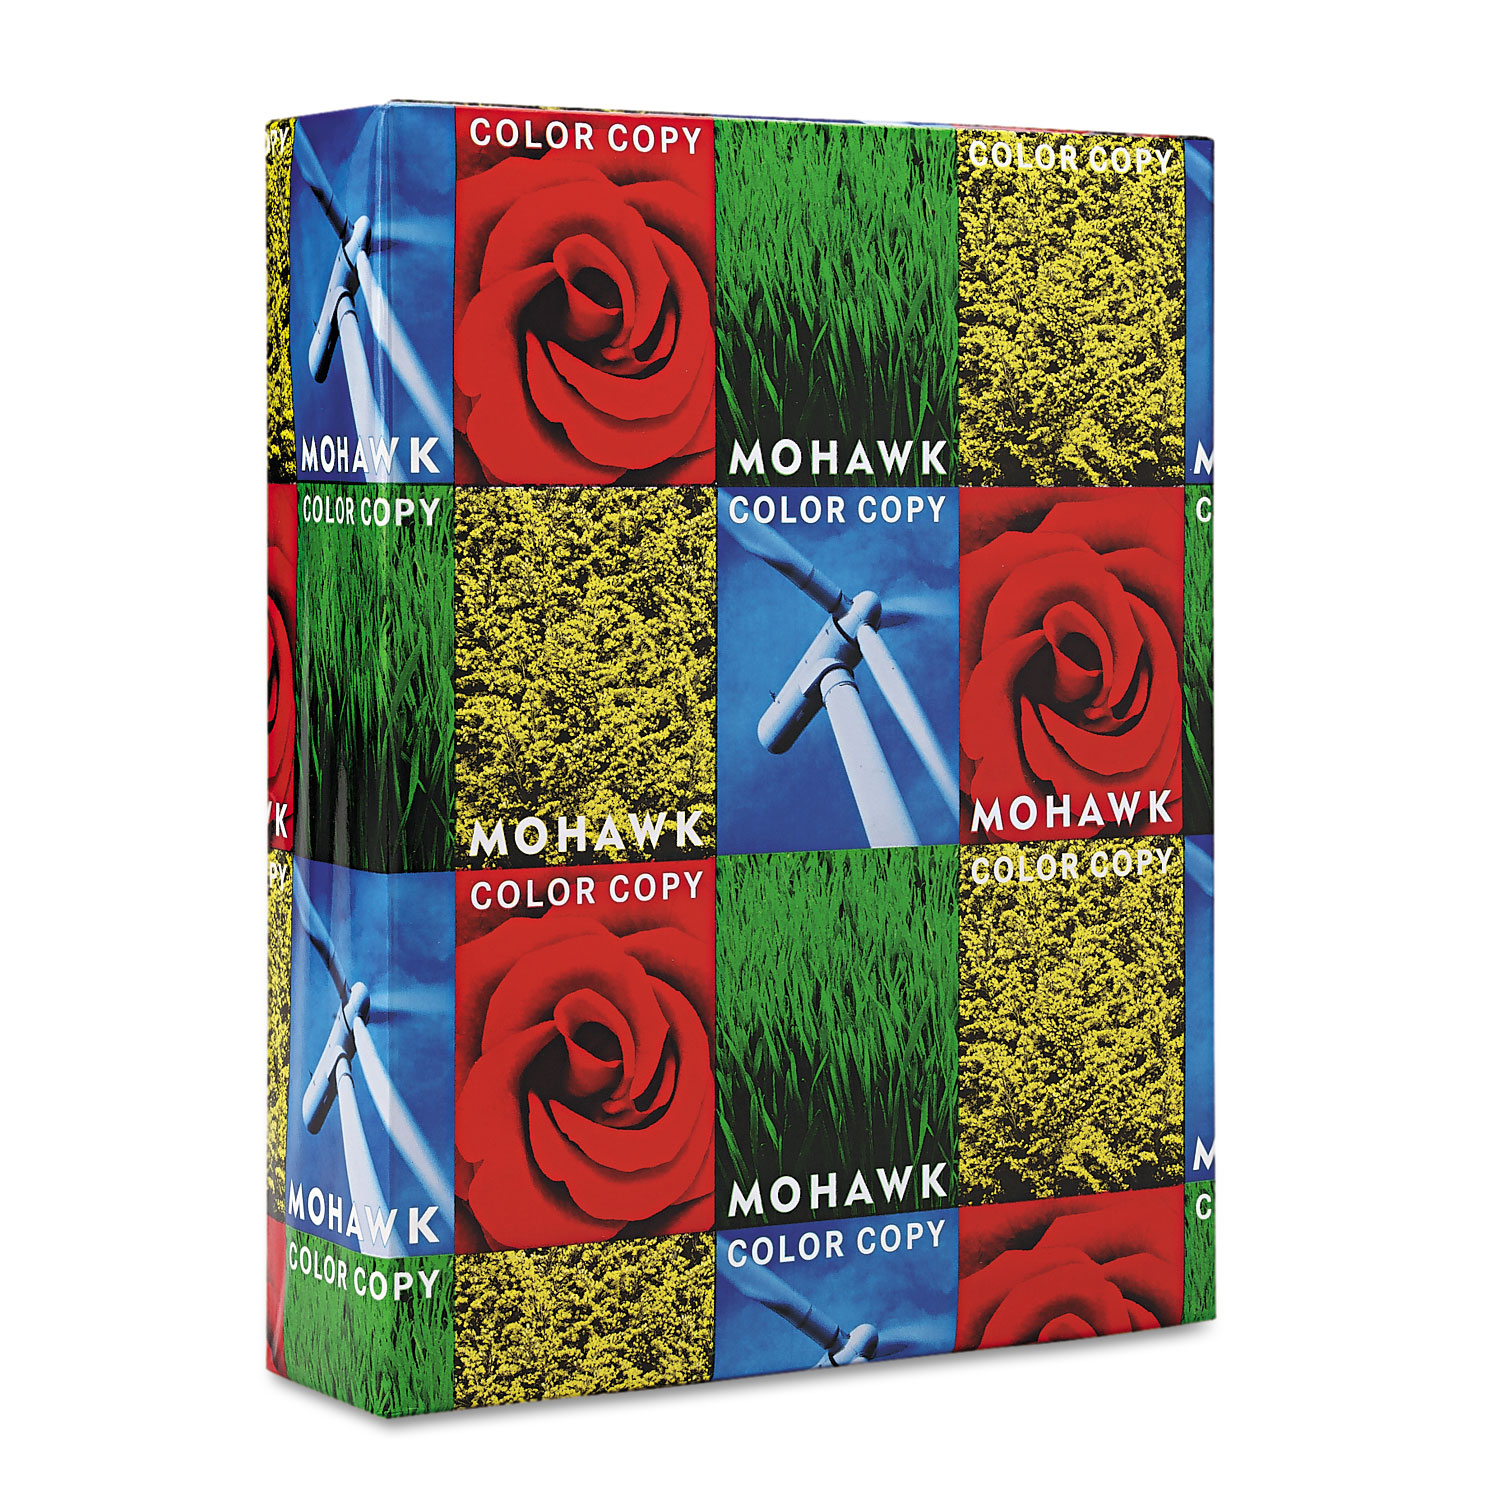 Mohawk MOW54301 Copier 100% Recycled Paper, 94 Brightness, 28lb 8-1/2x11, PC White, 500 Sheets